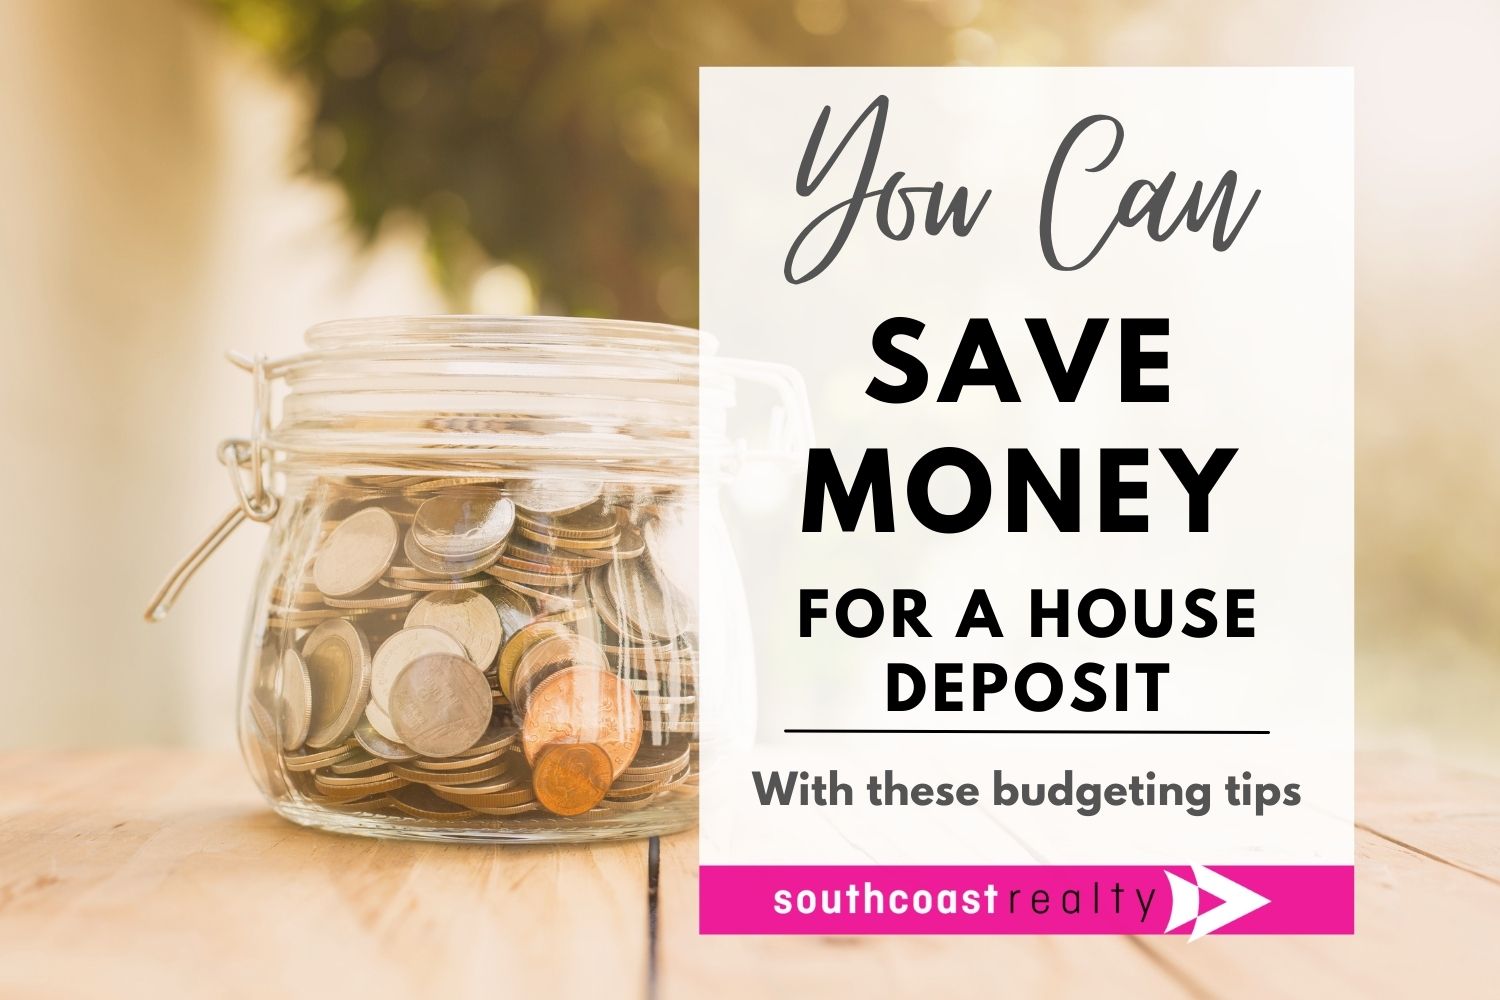 Are you saving a deposit for a house?